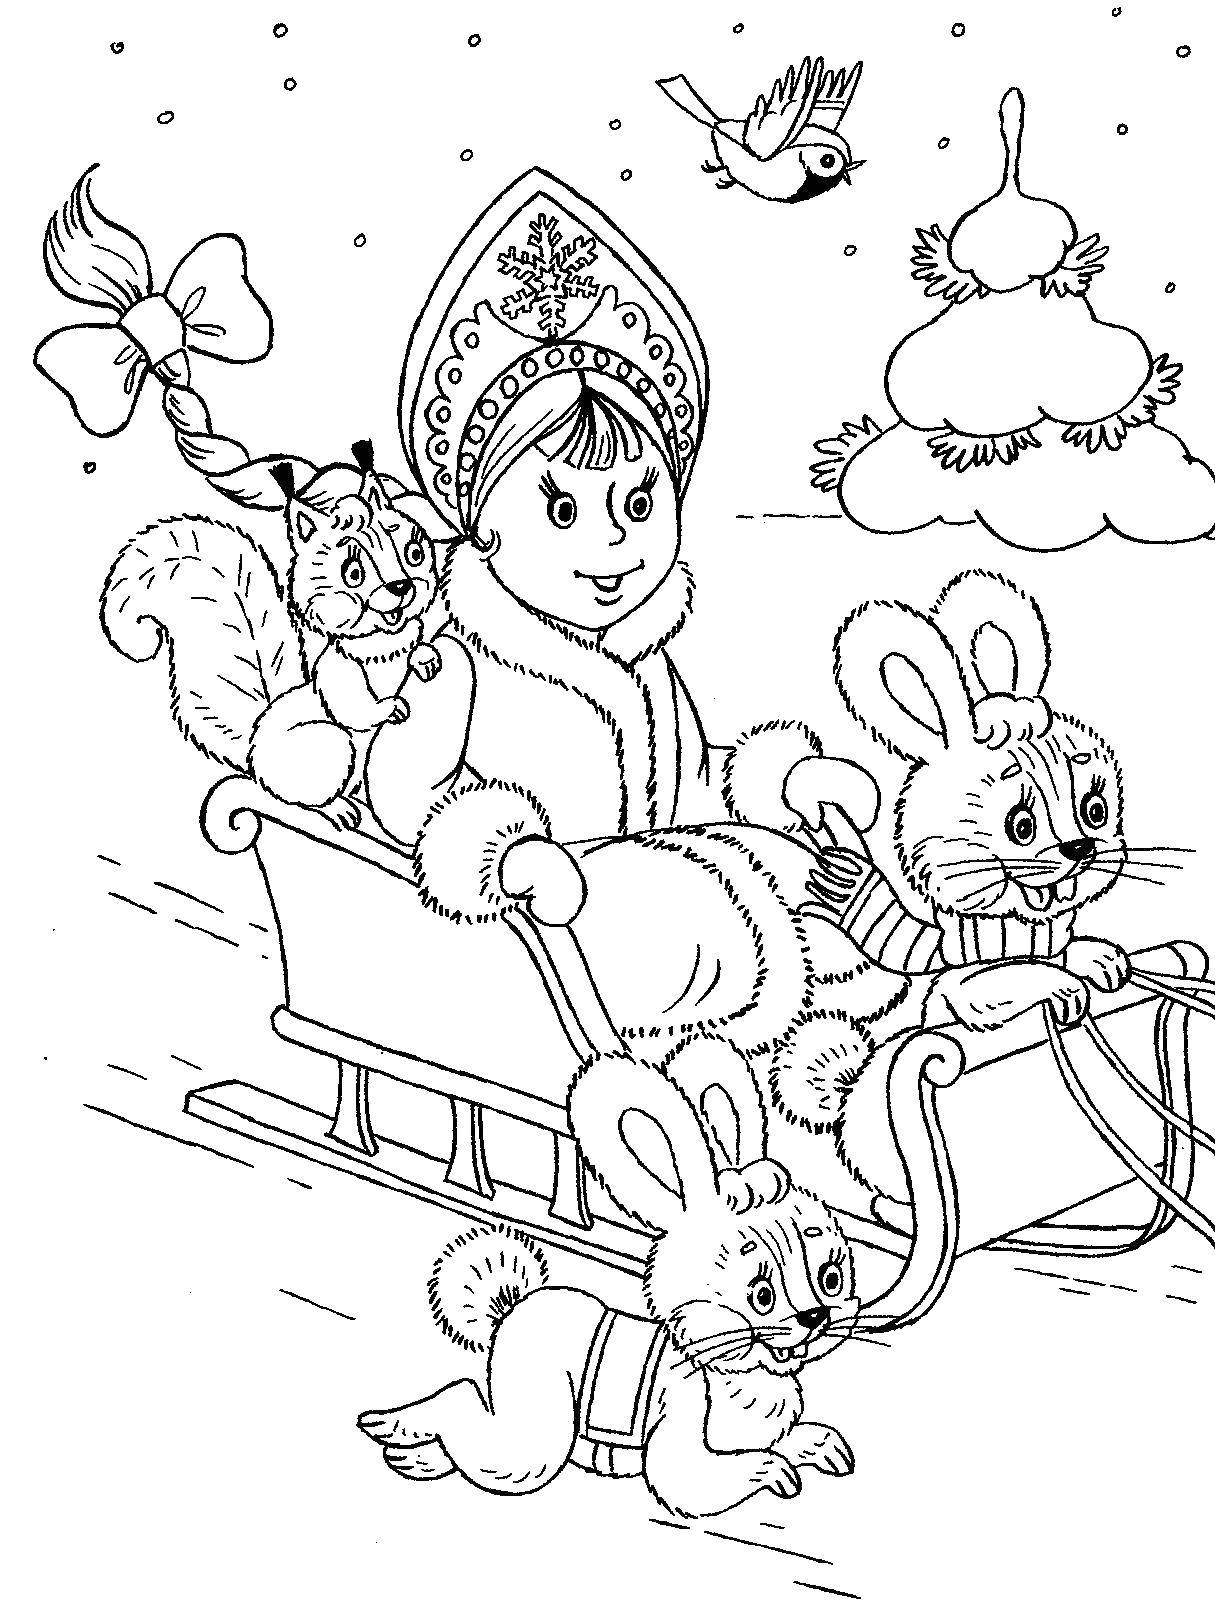 Coloring Snow maiden on a sleigh with your friends. Category the tale of Snegurochka. Tags:  Snow maiden, winter, New Year, baby.